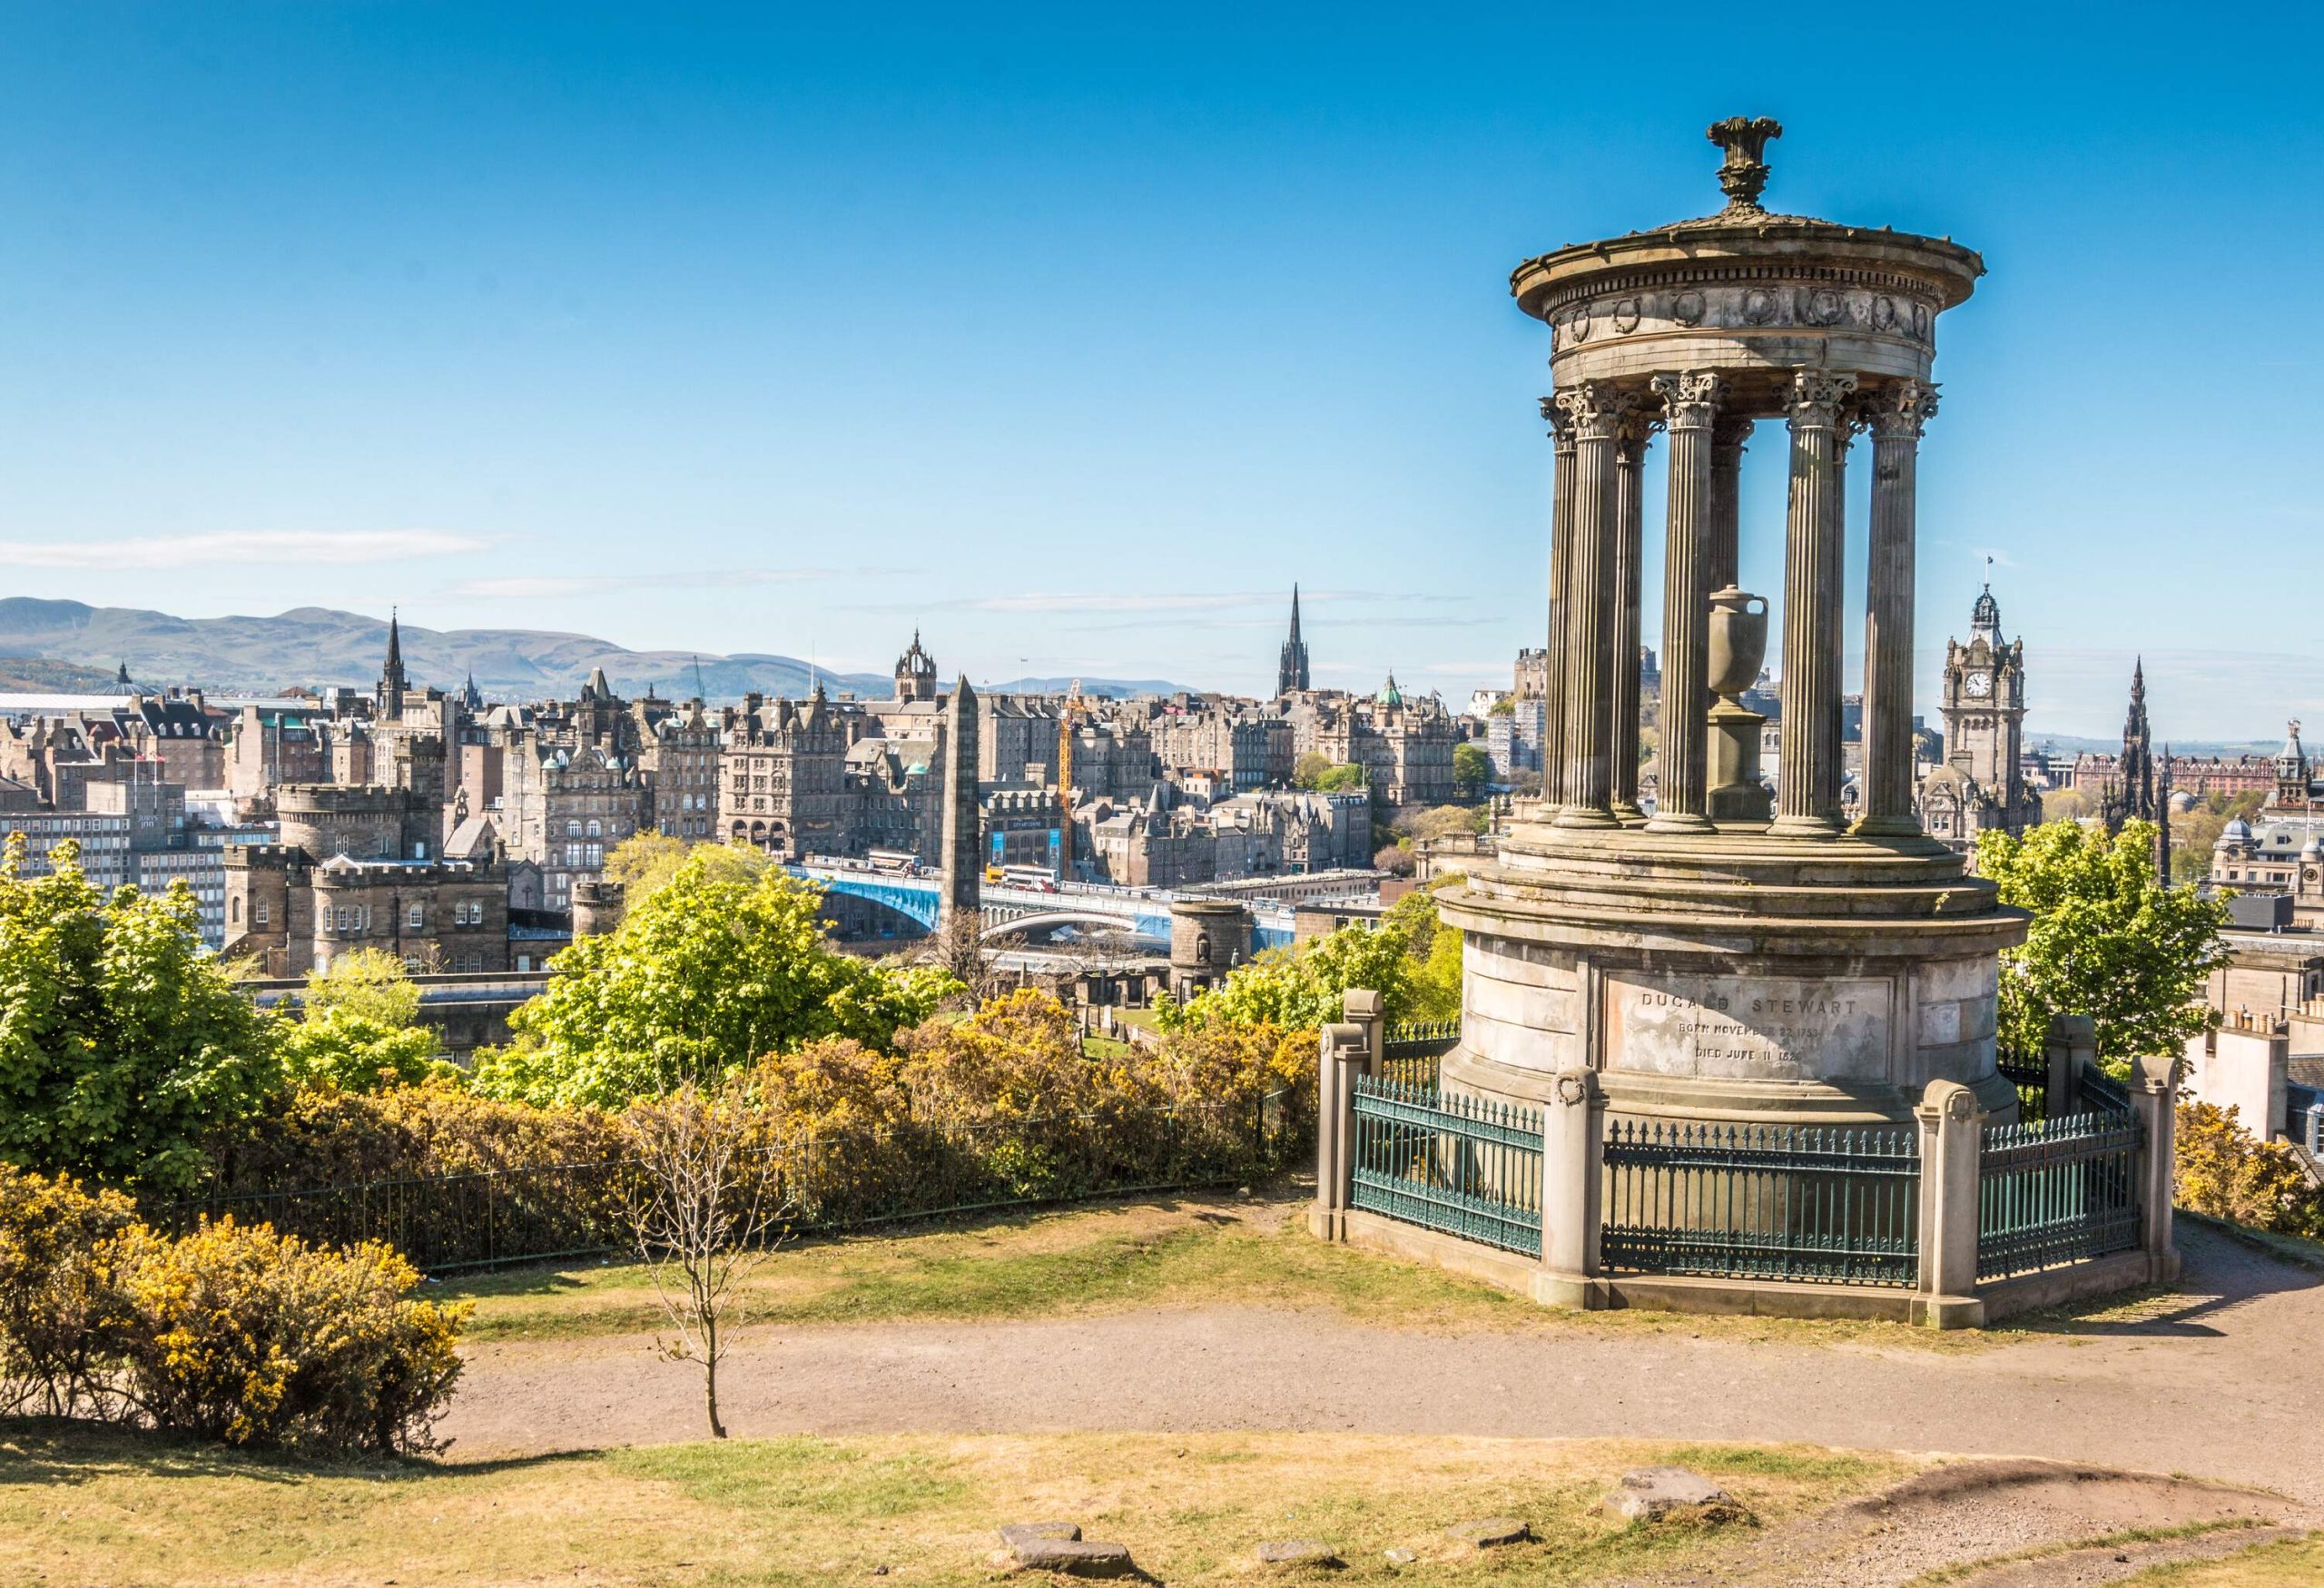 The Dugald Stewart Monument with panoramic views of the city below.